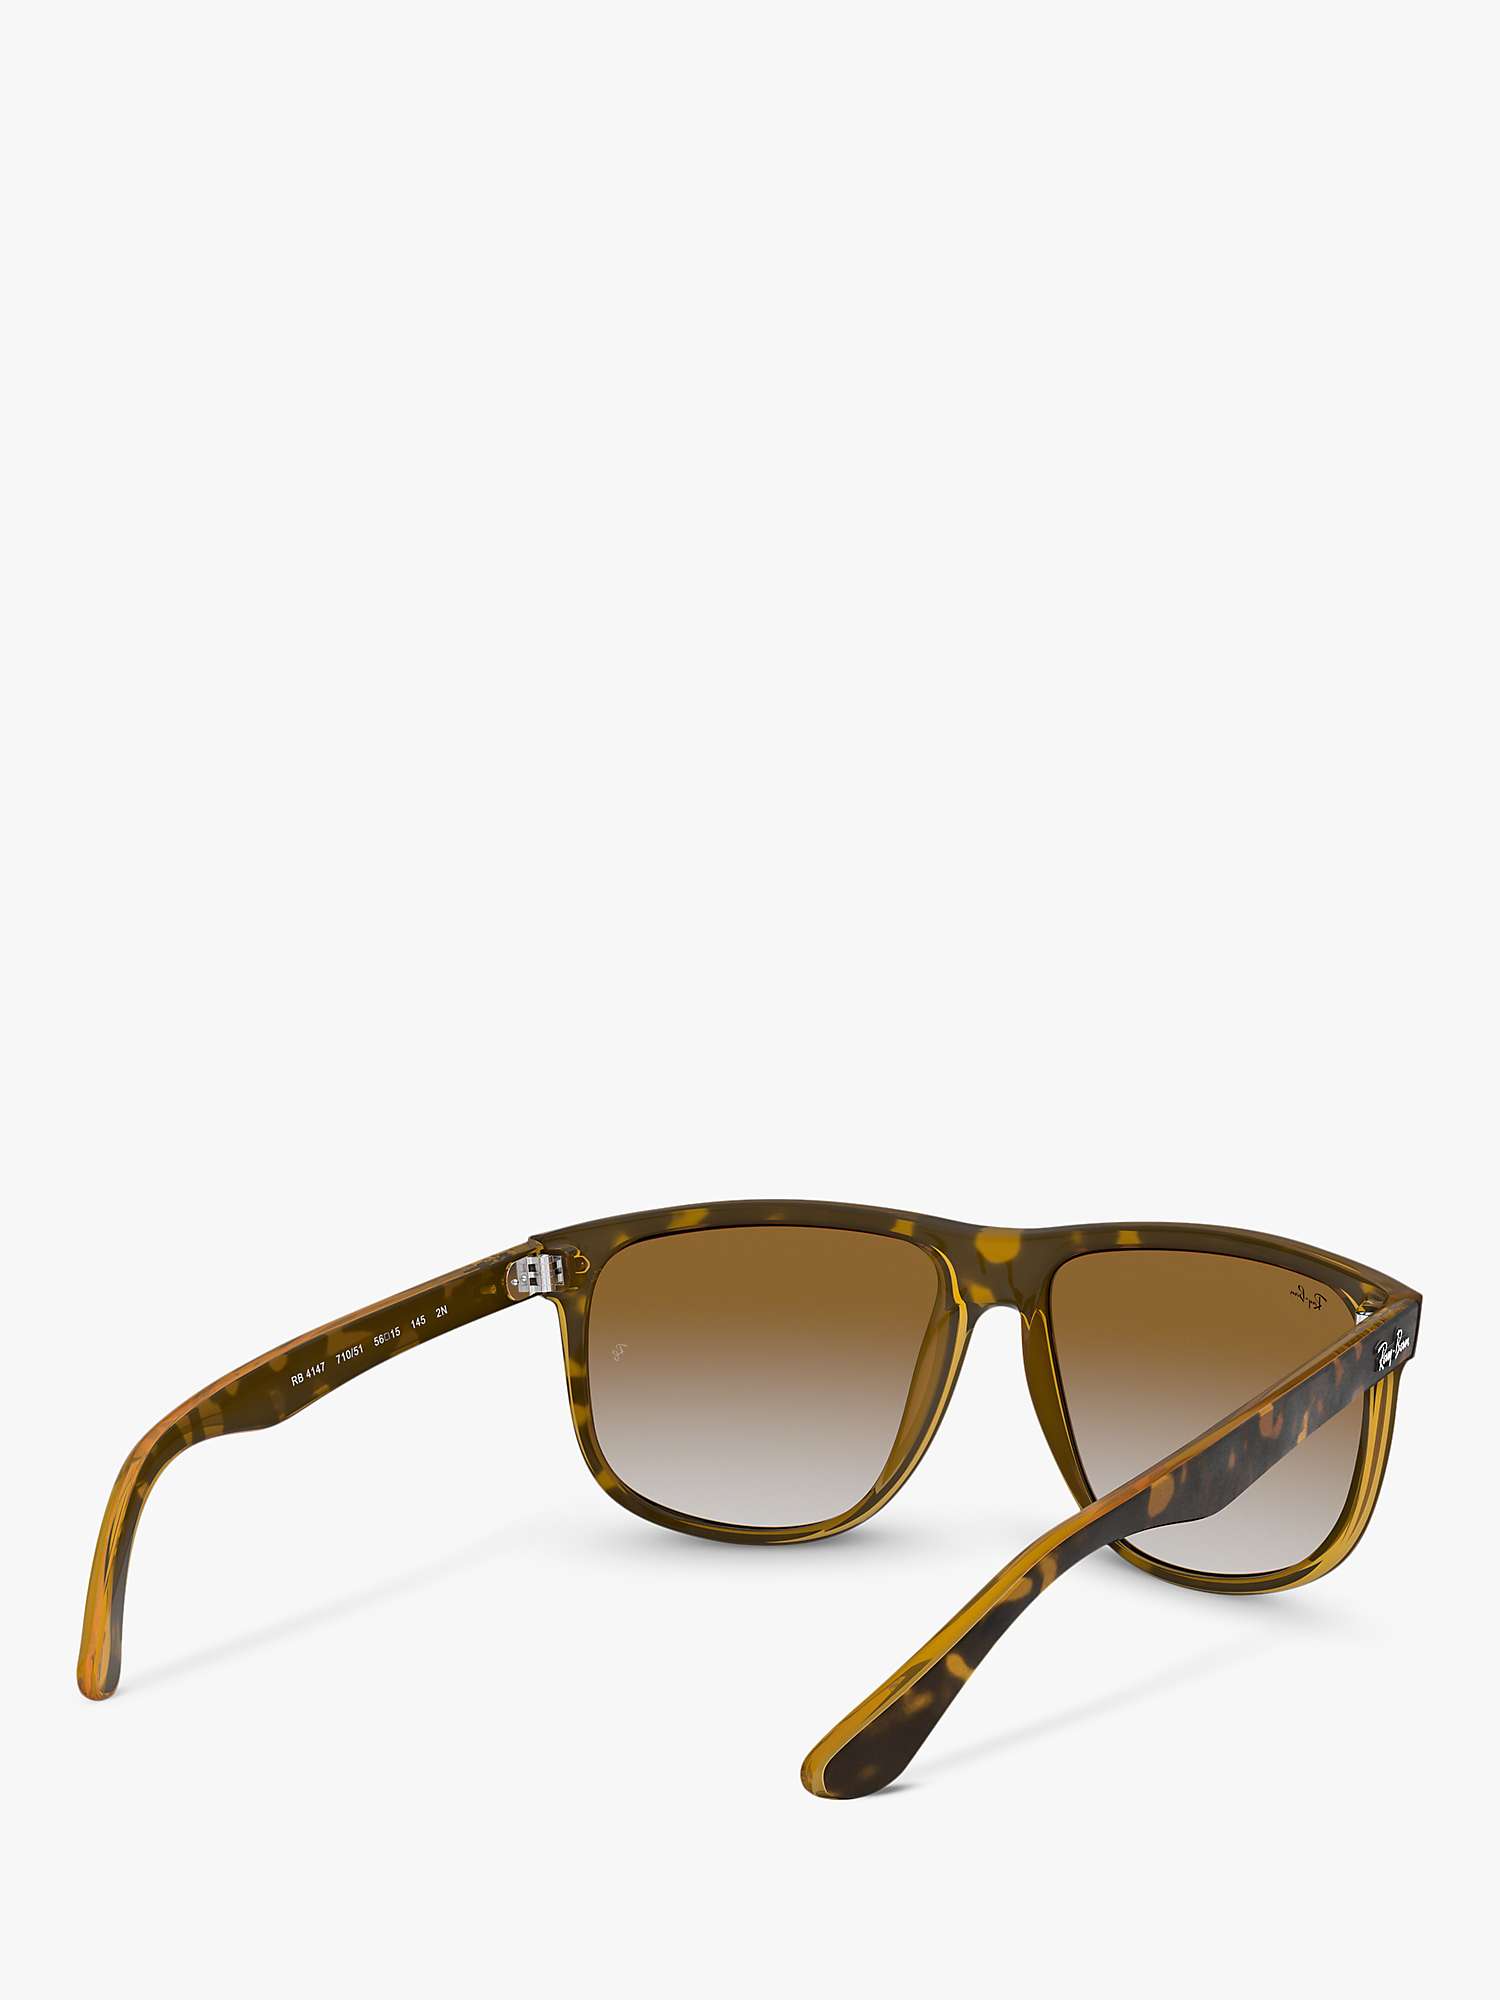 Buy Ray-Ban RB4147 Square Sunglasses Online at johnlewis.com